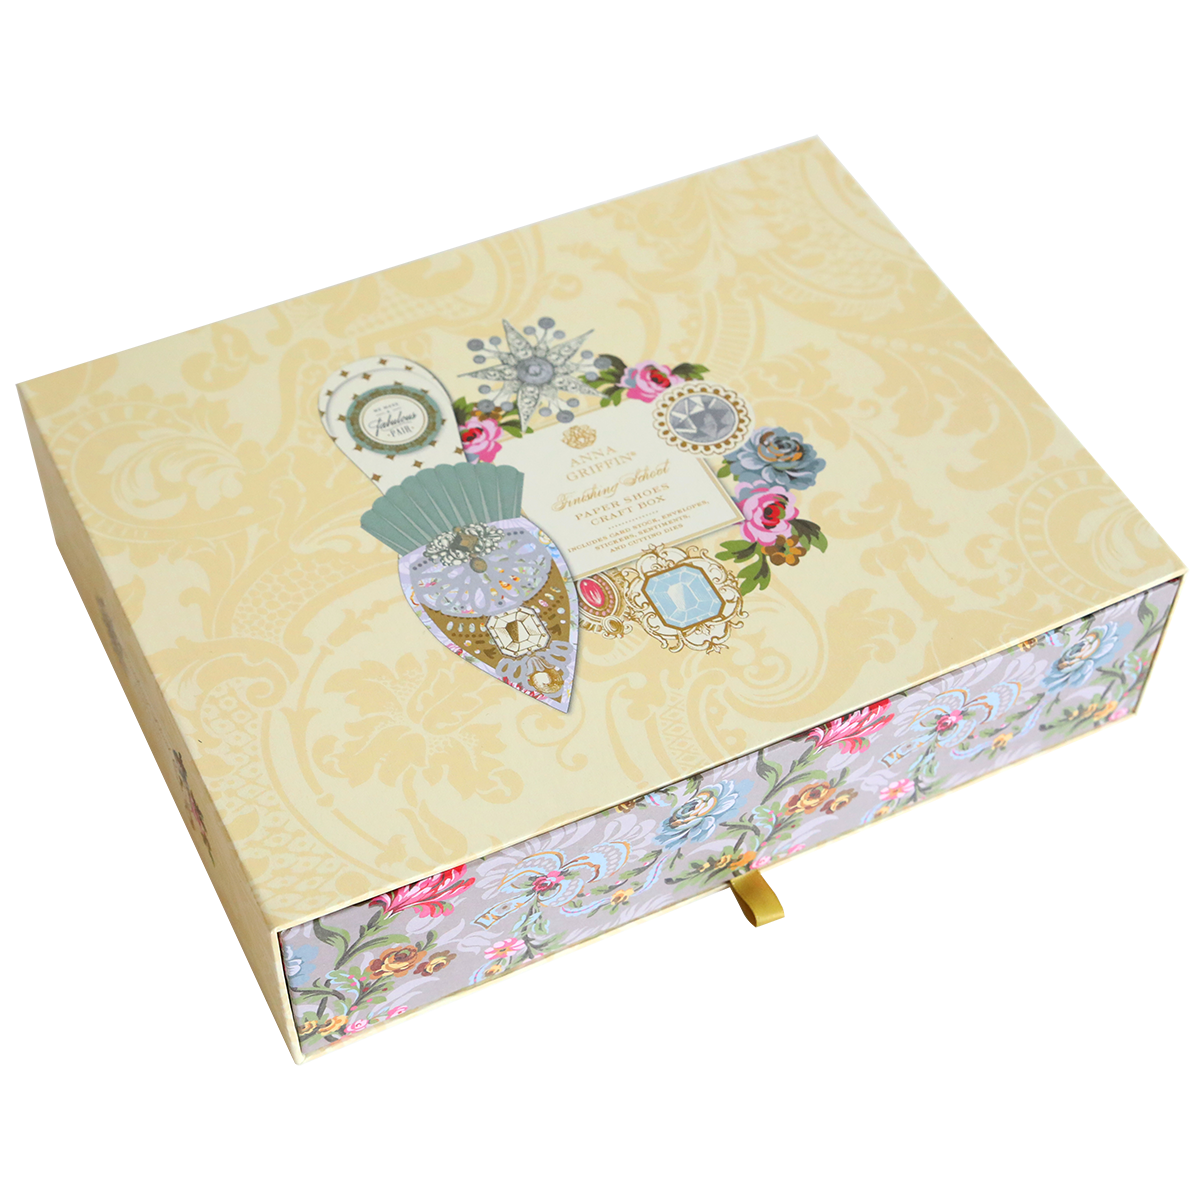 A beautifully crafted Paper Shoes Finishing School Craft Box adorned with a delicate floral design. Perfect for special occasions or as a decorative storage solution.